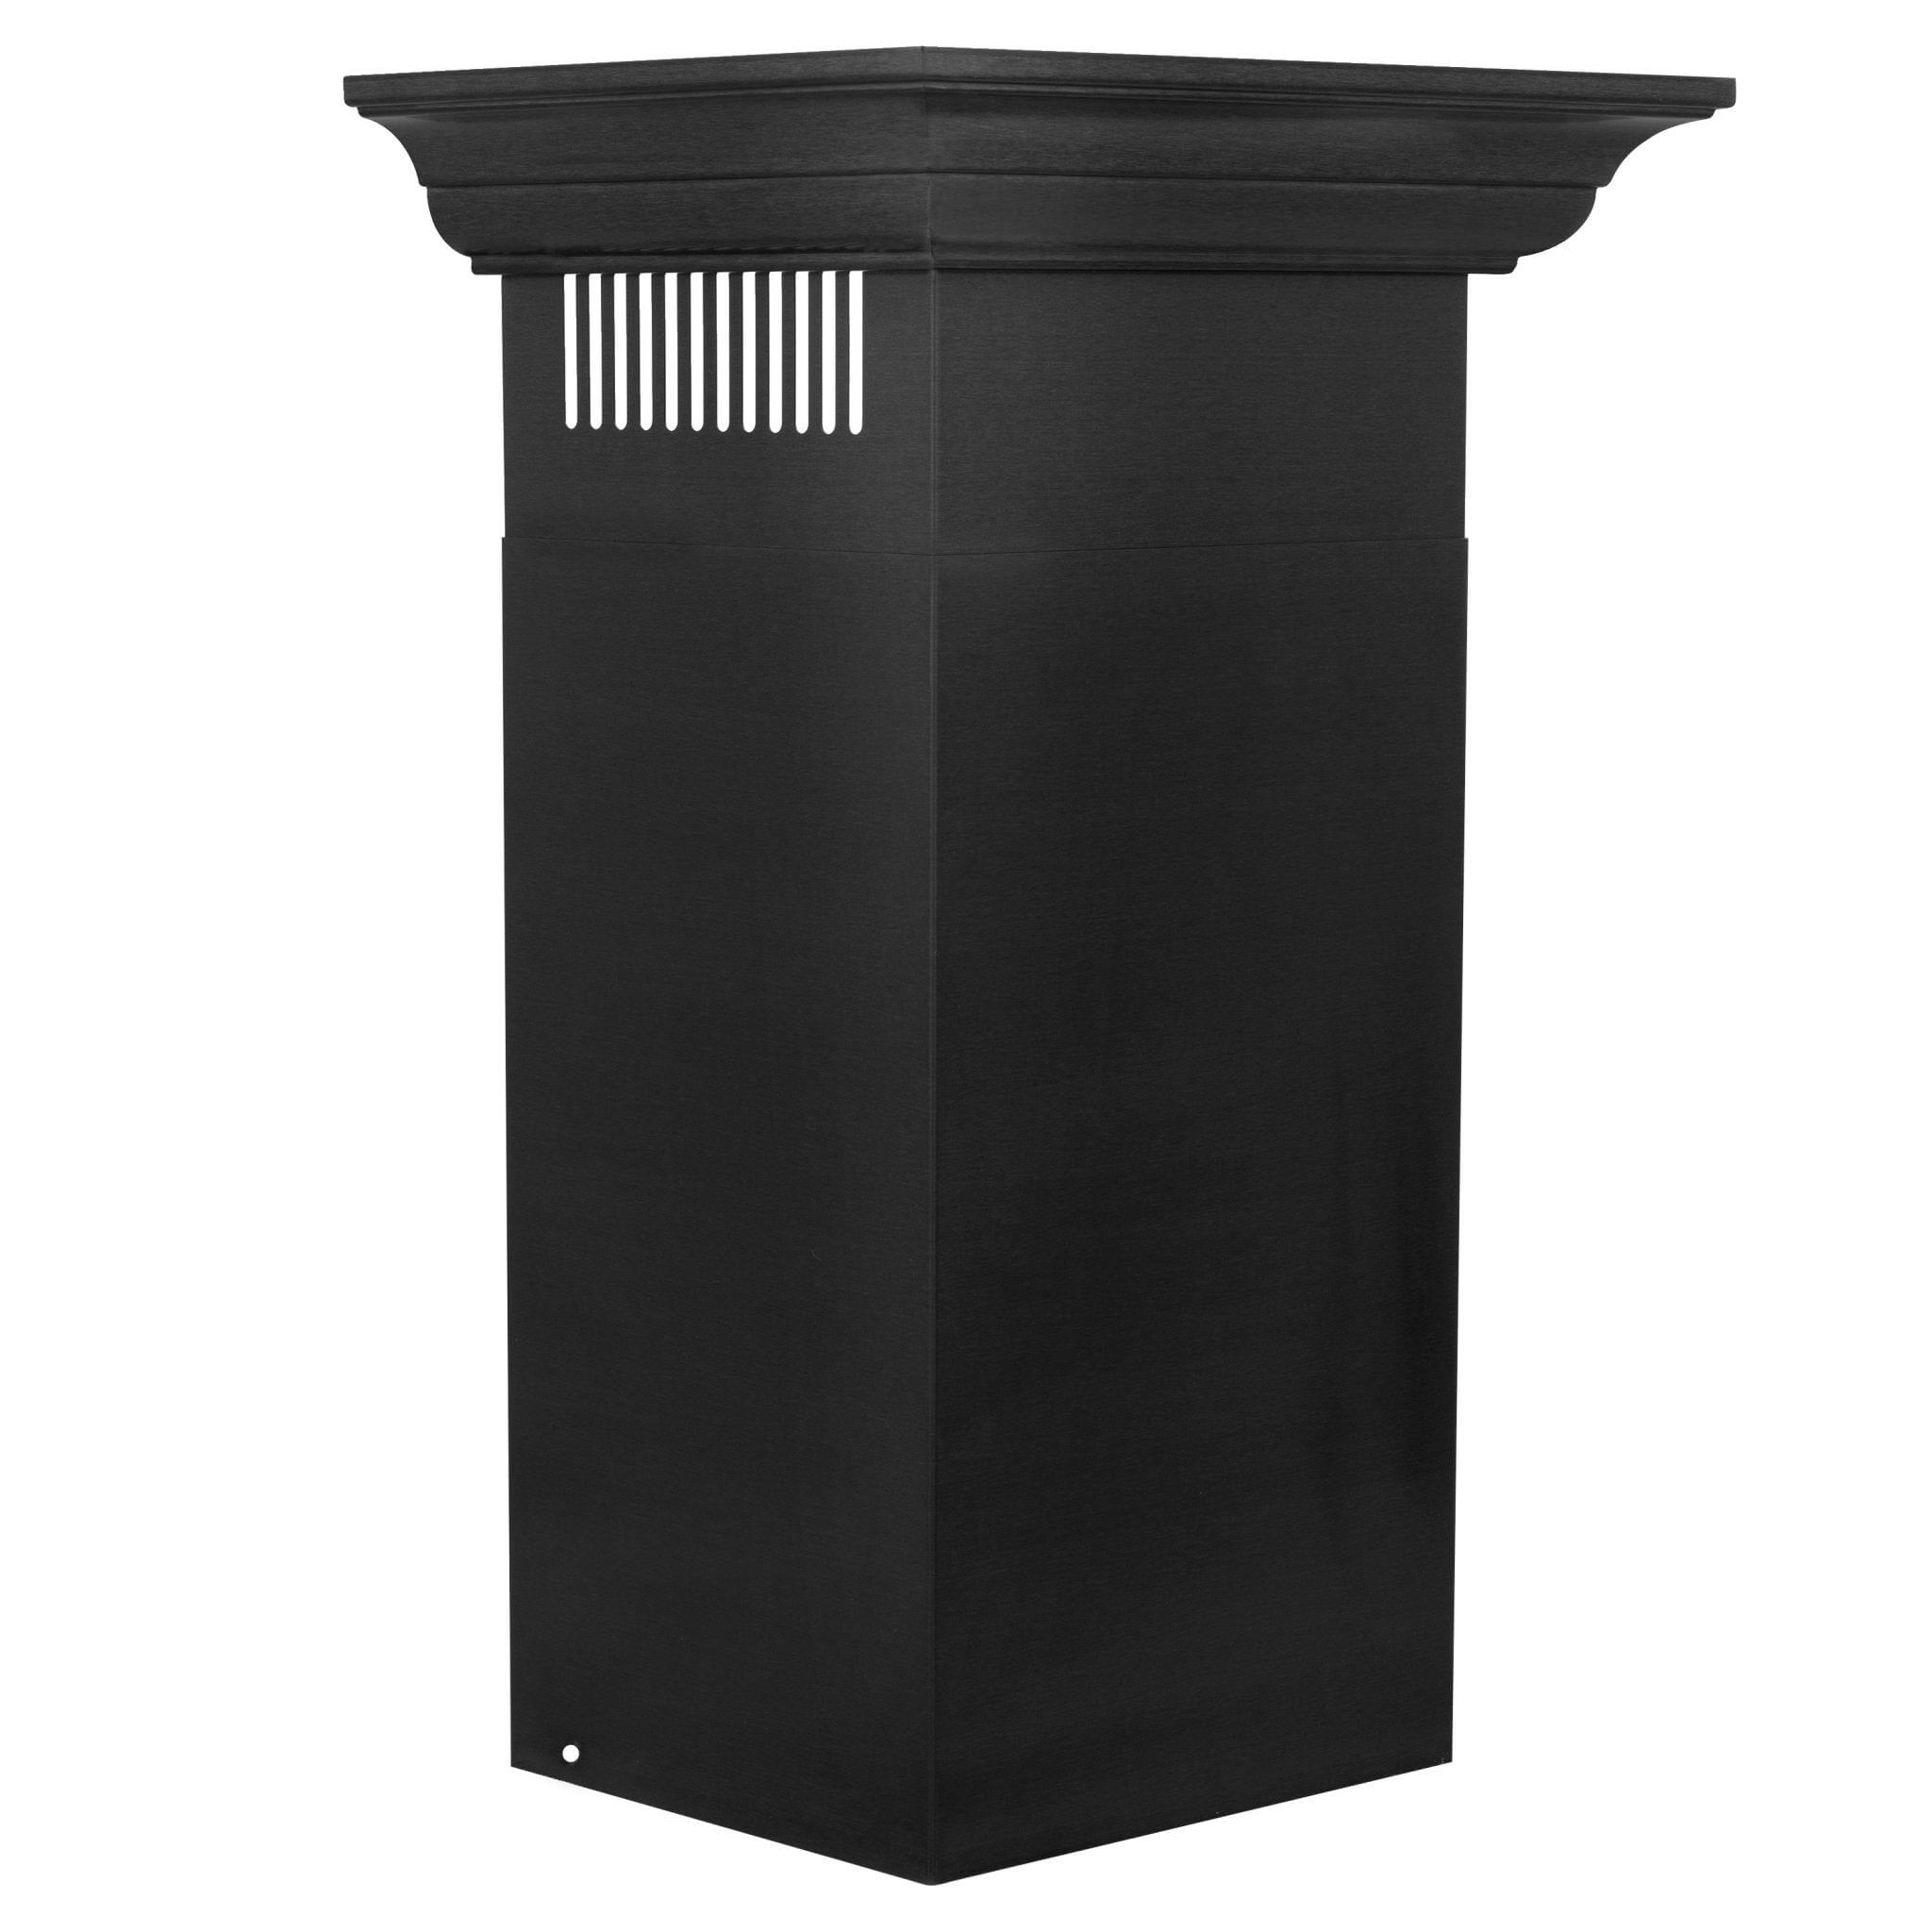 Black Stainless Steel Chimney with Crown Molding (BSKBNCRN)